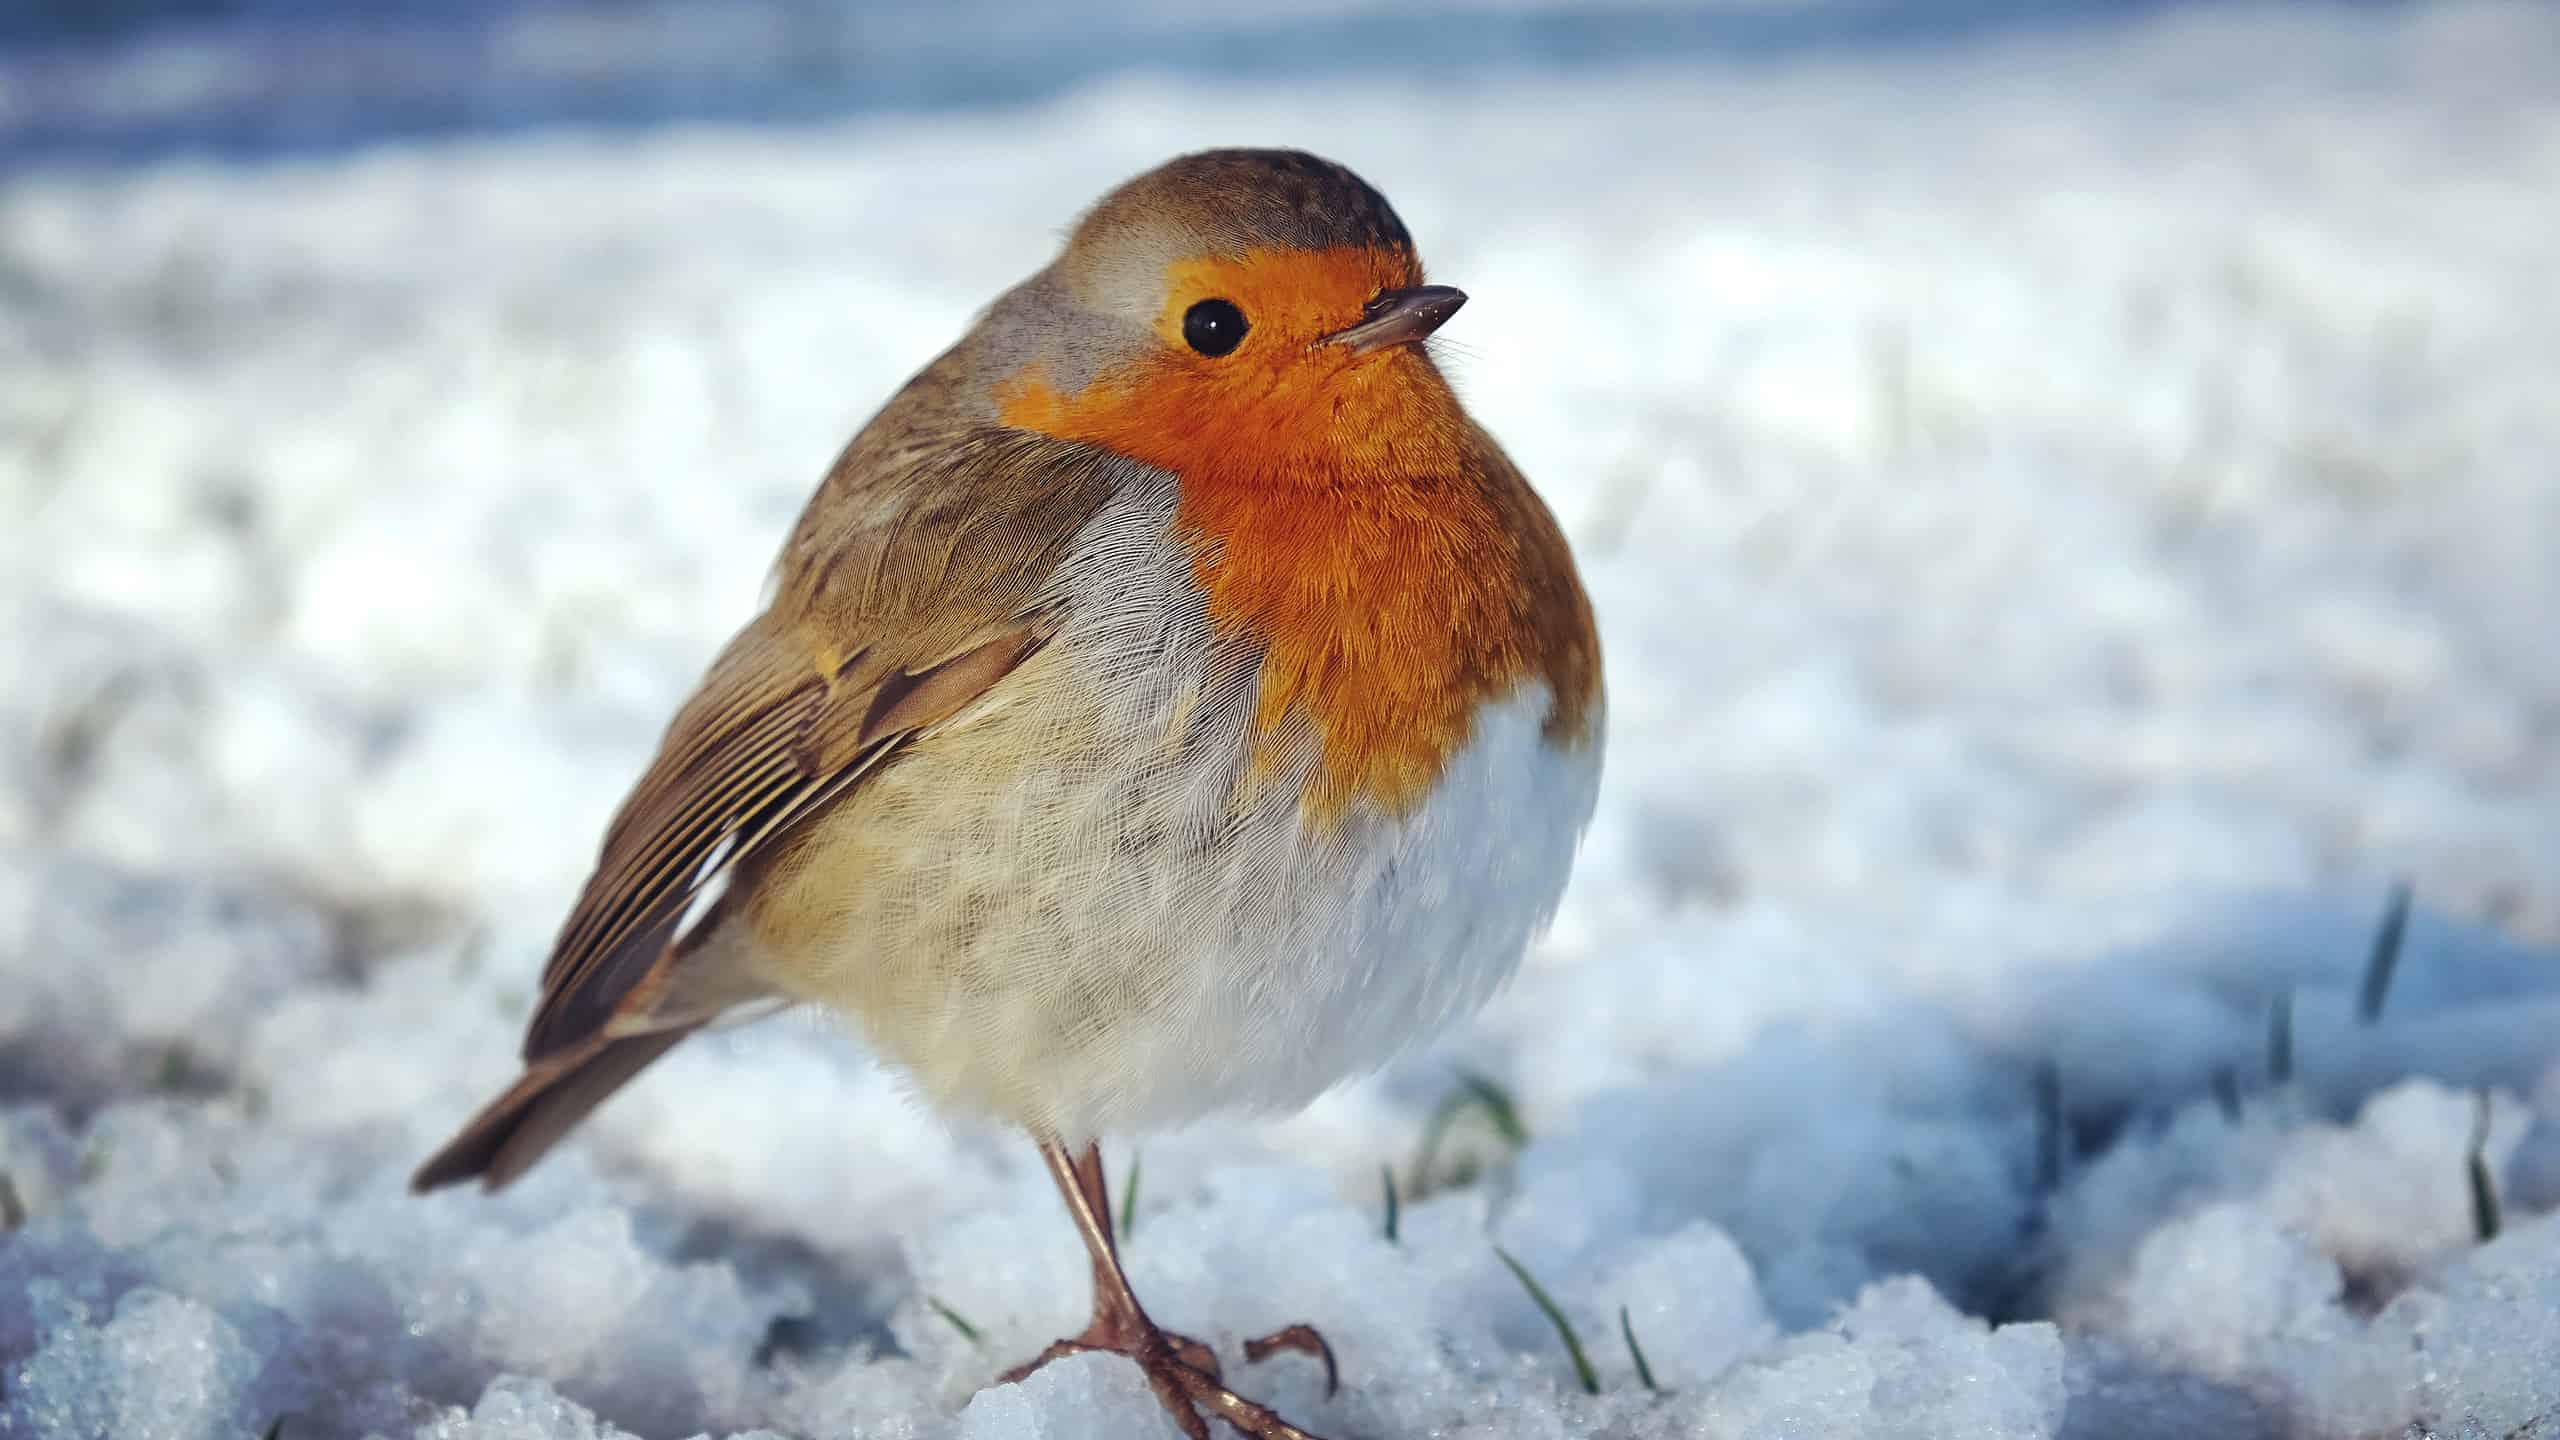 The European robin (Erithacus rubecula) fluffed up to keep warm in the snow. The bird has a white belly, a peachy/rosy neck/chest and a taupe back. The bird has its feather fluffed up t keep warm in the snow it is pictured in. The bird looks very round.